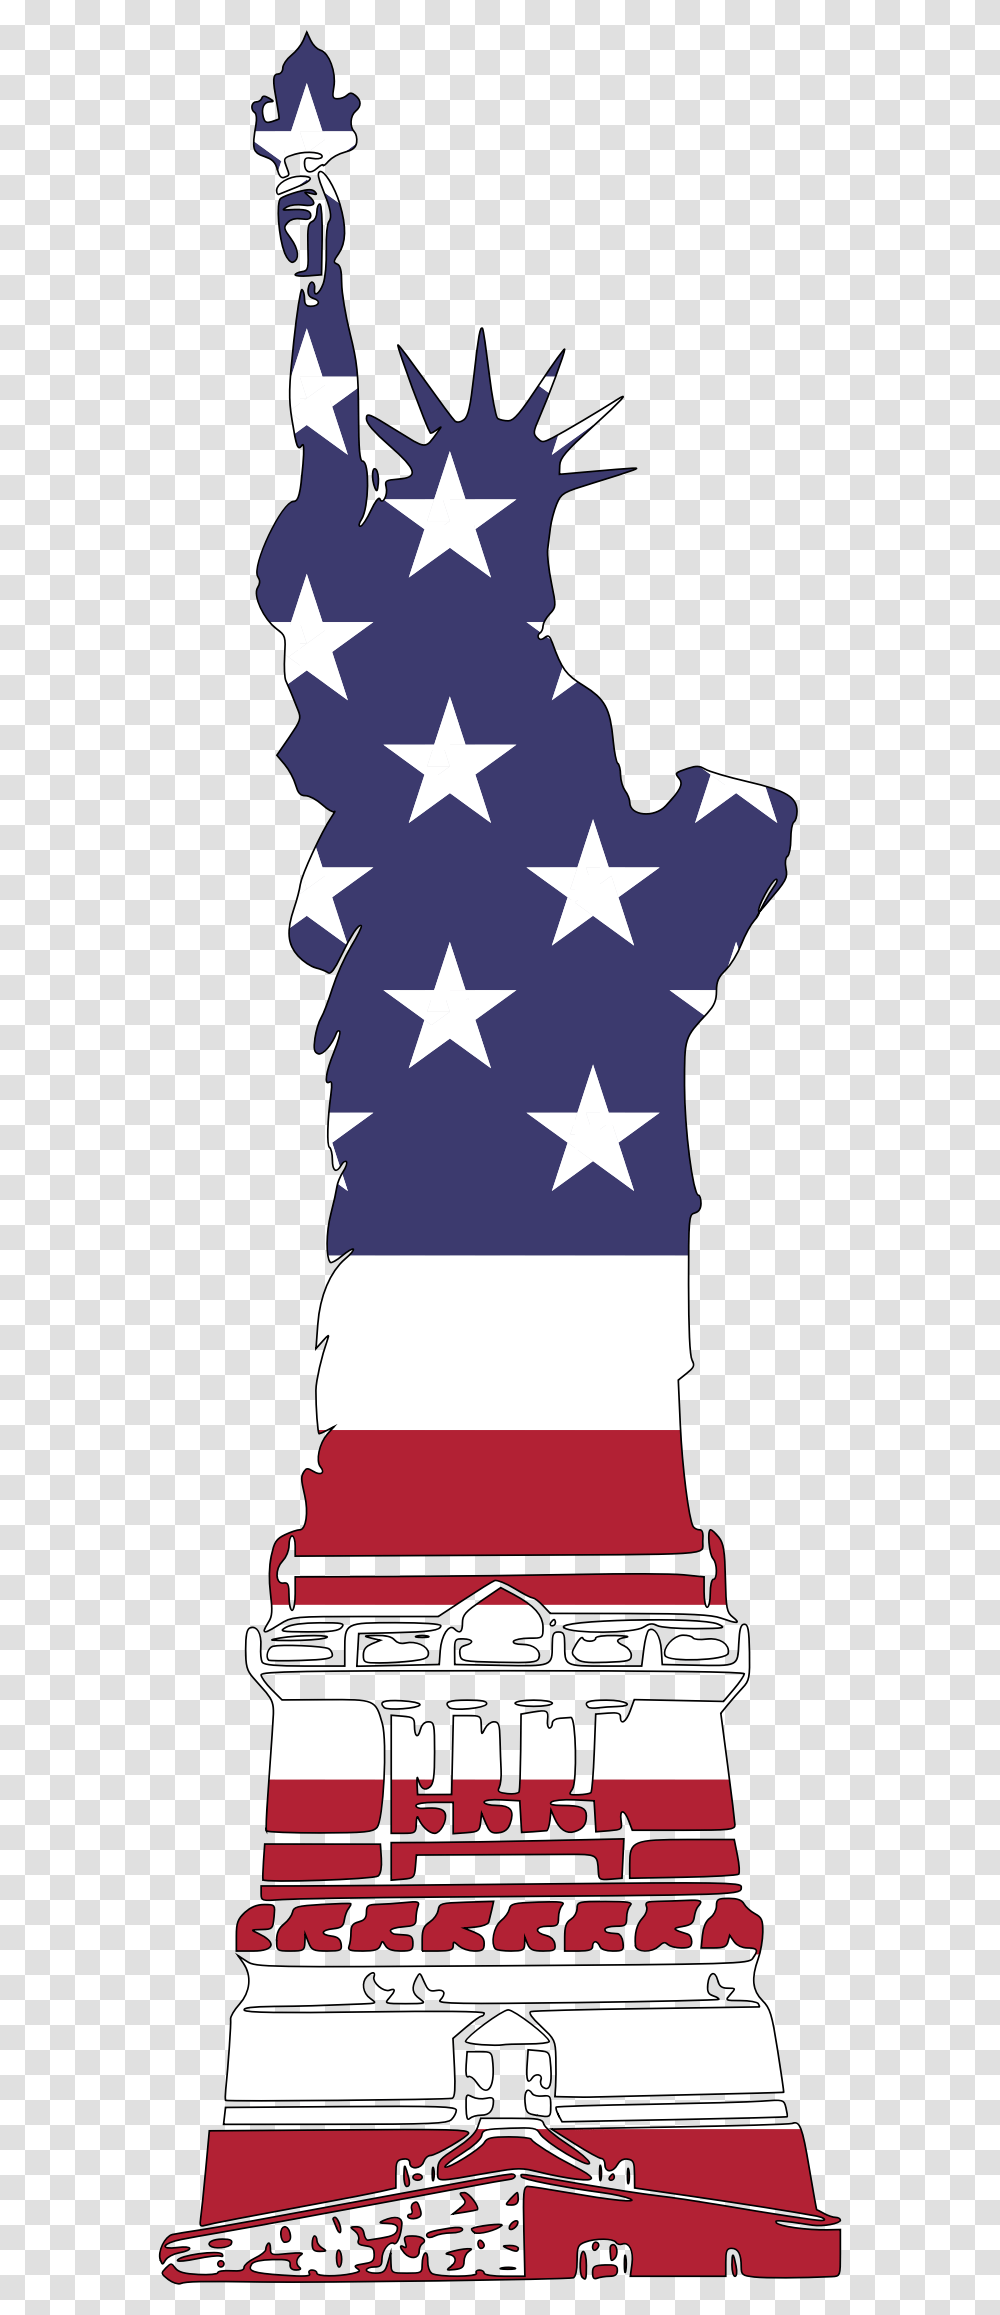 Statue Of Liberty Wrapped With The Flag Clip Arts Statue Of Liberty Clip Art, Star Symbol, Poster, Advertisement Transparent Png